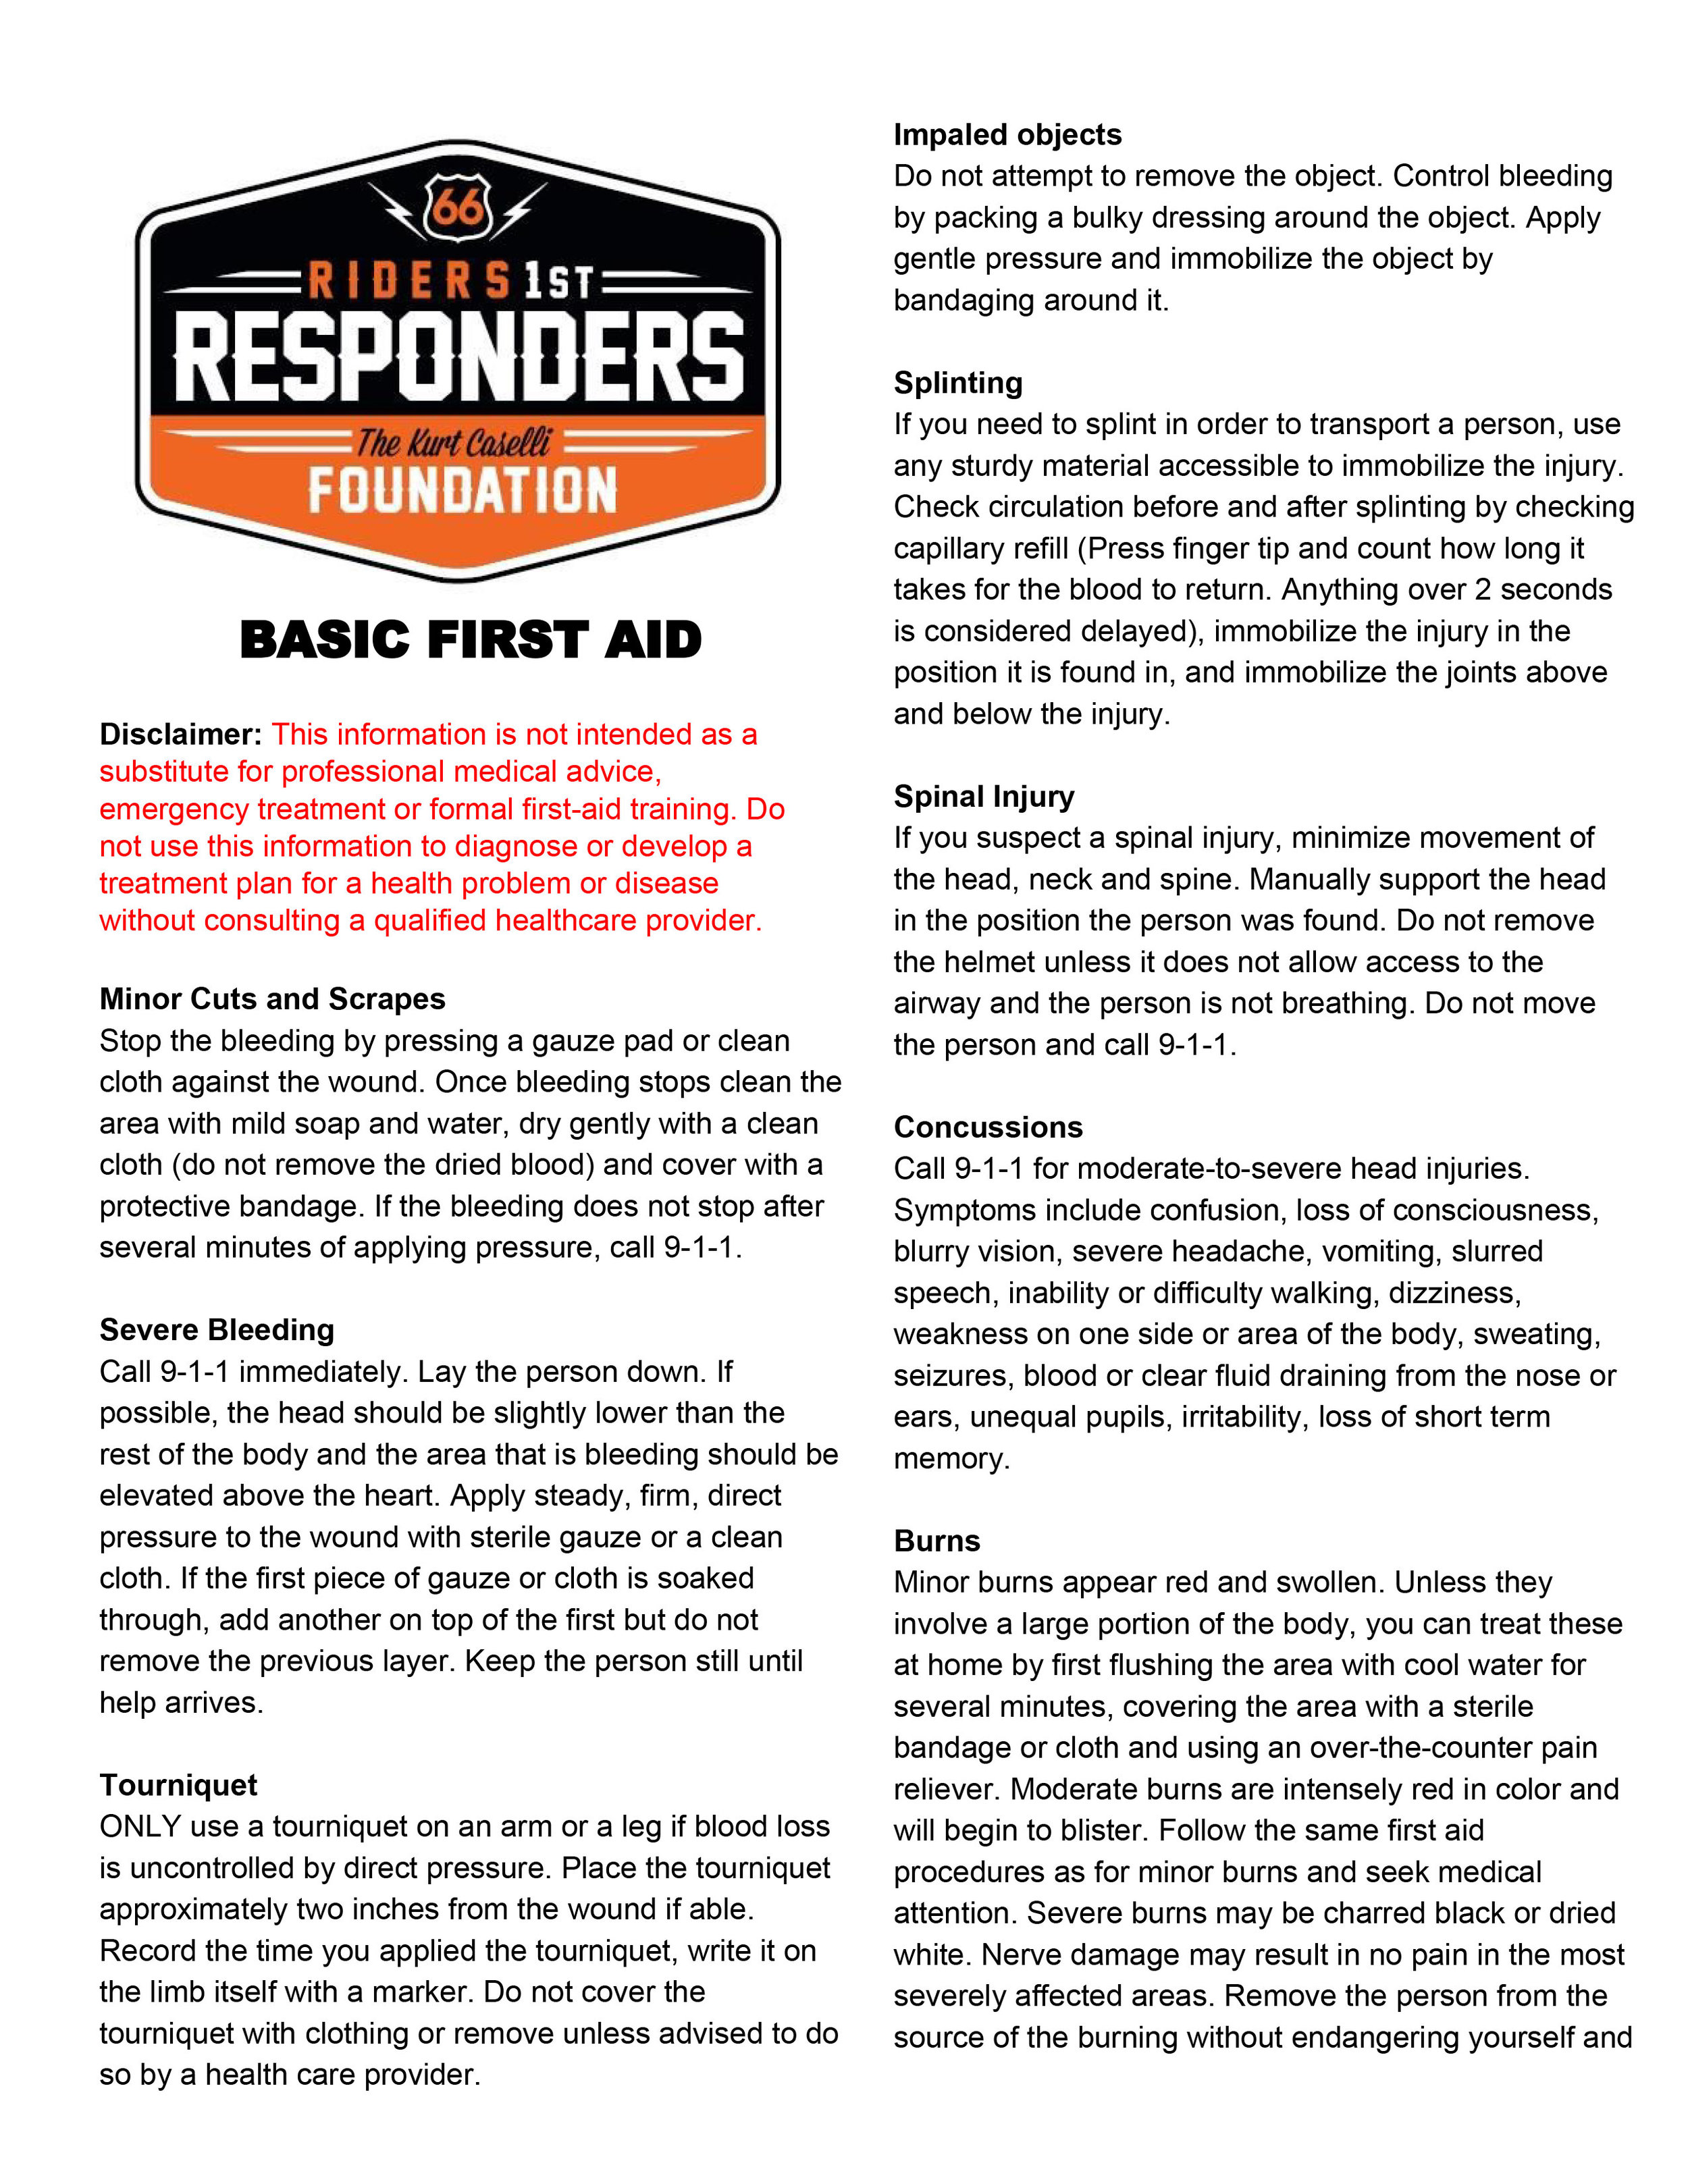 KCF-Basic-First-Aid-Page1of3.jpg